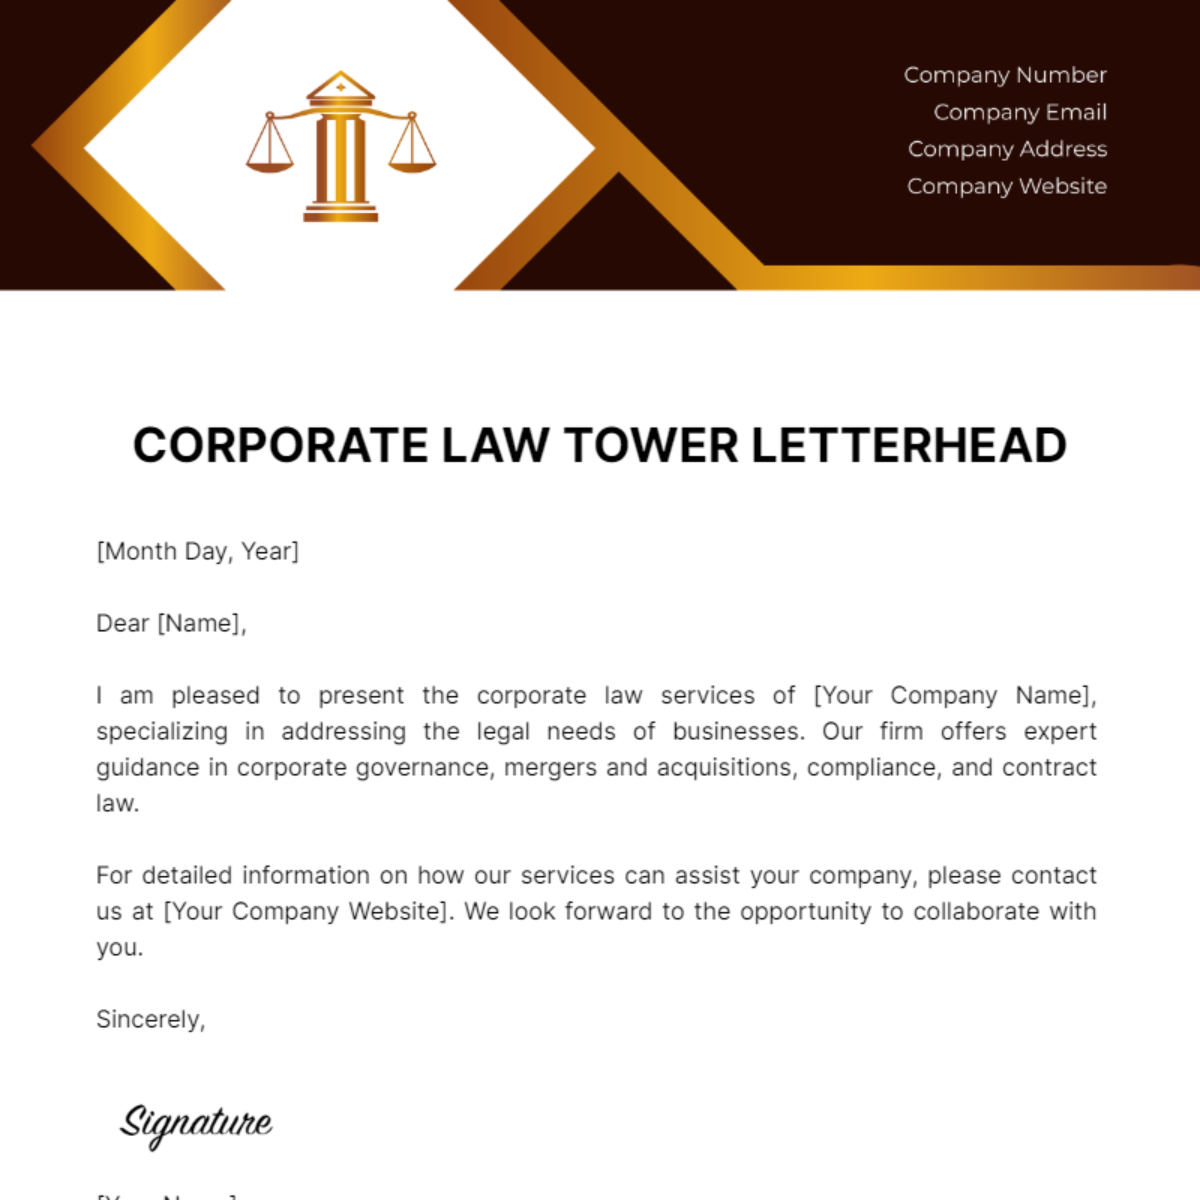 Free Corporate Law Tower Letterhead Template